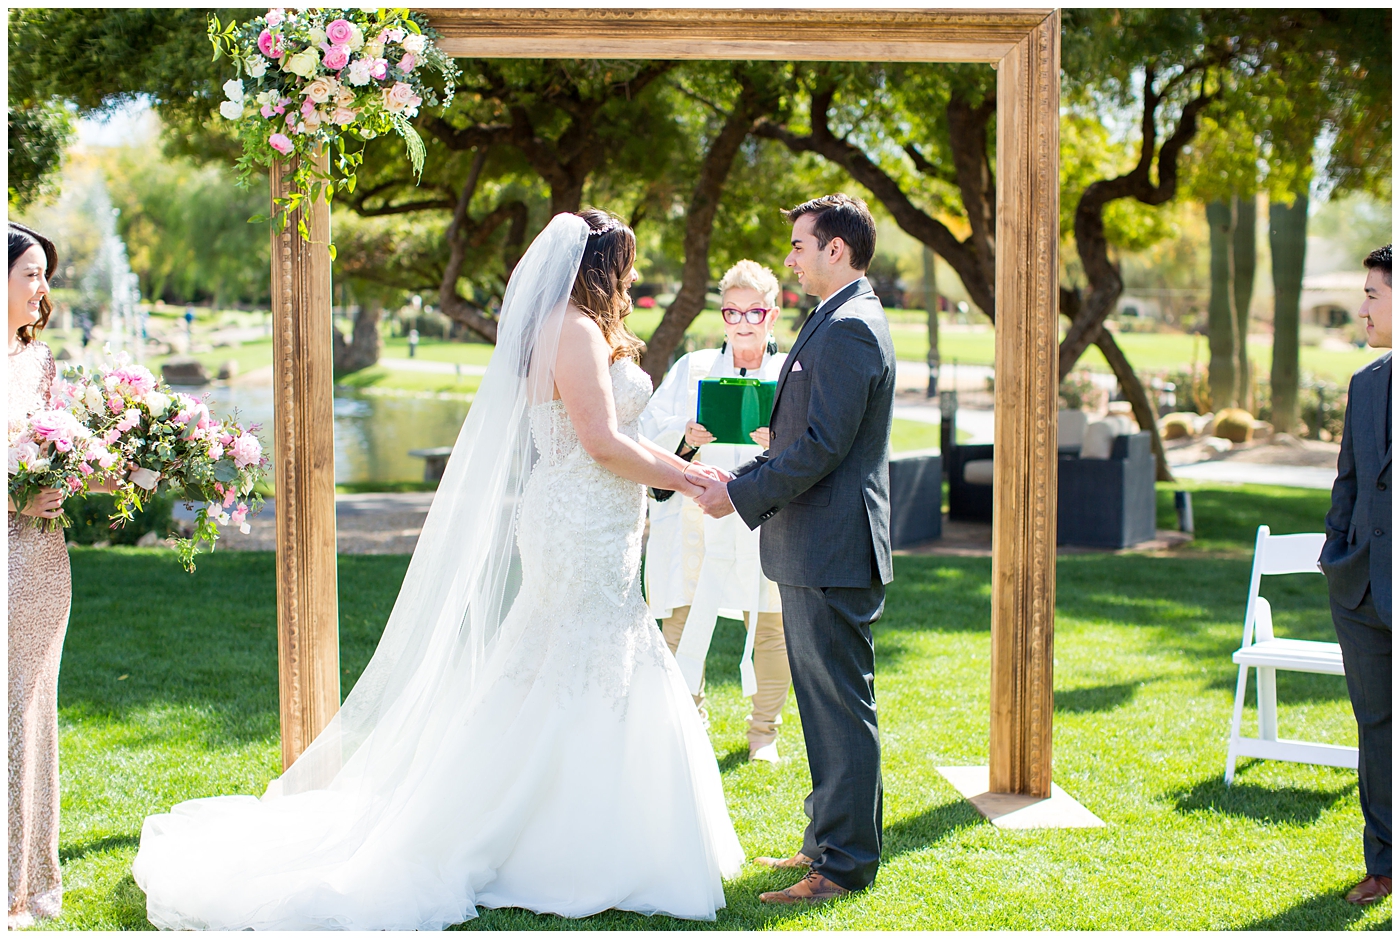 bride in strapless wedding dress with beads and shiny sparkle tool holding pink peony, roses, light coral rose and loose greenery bridal bouquet with groom in gray suit with silver tie standing under picture frame arch during outdoor wedding ceremony at fairmont princess